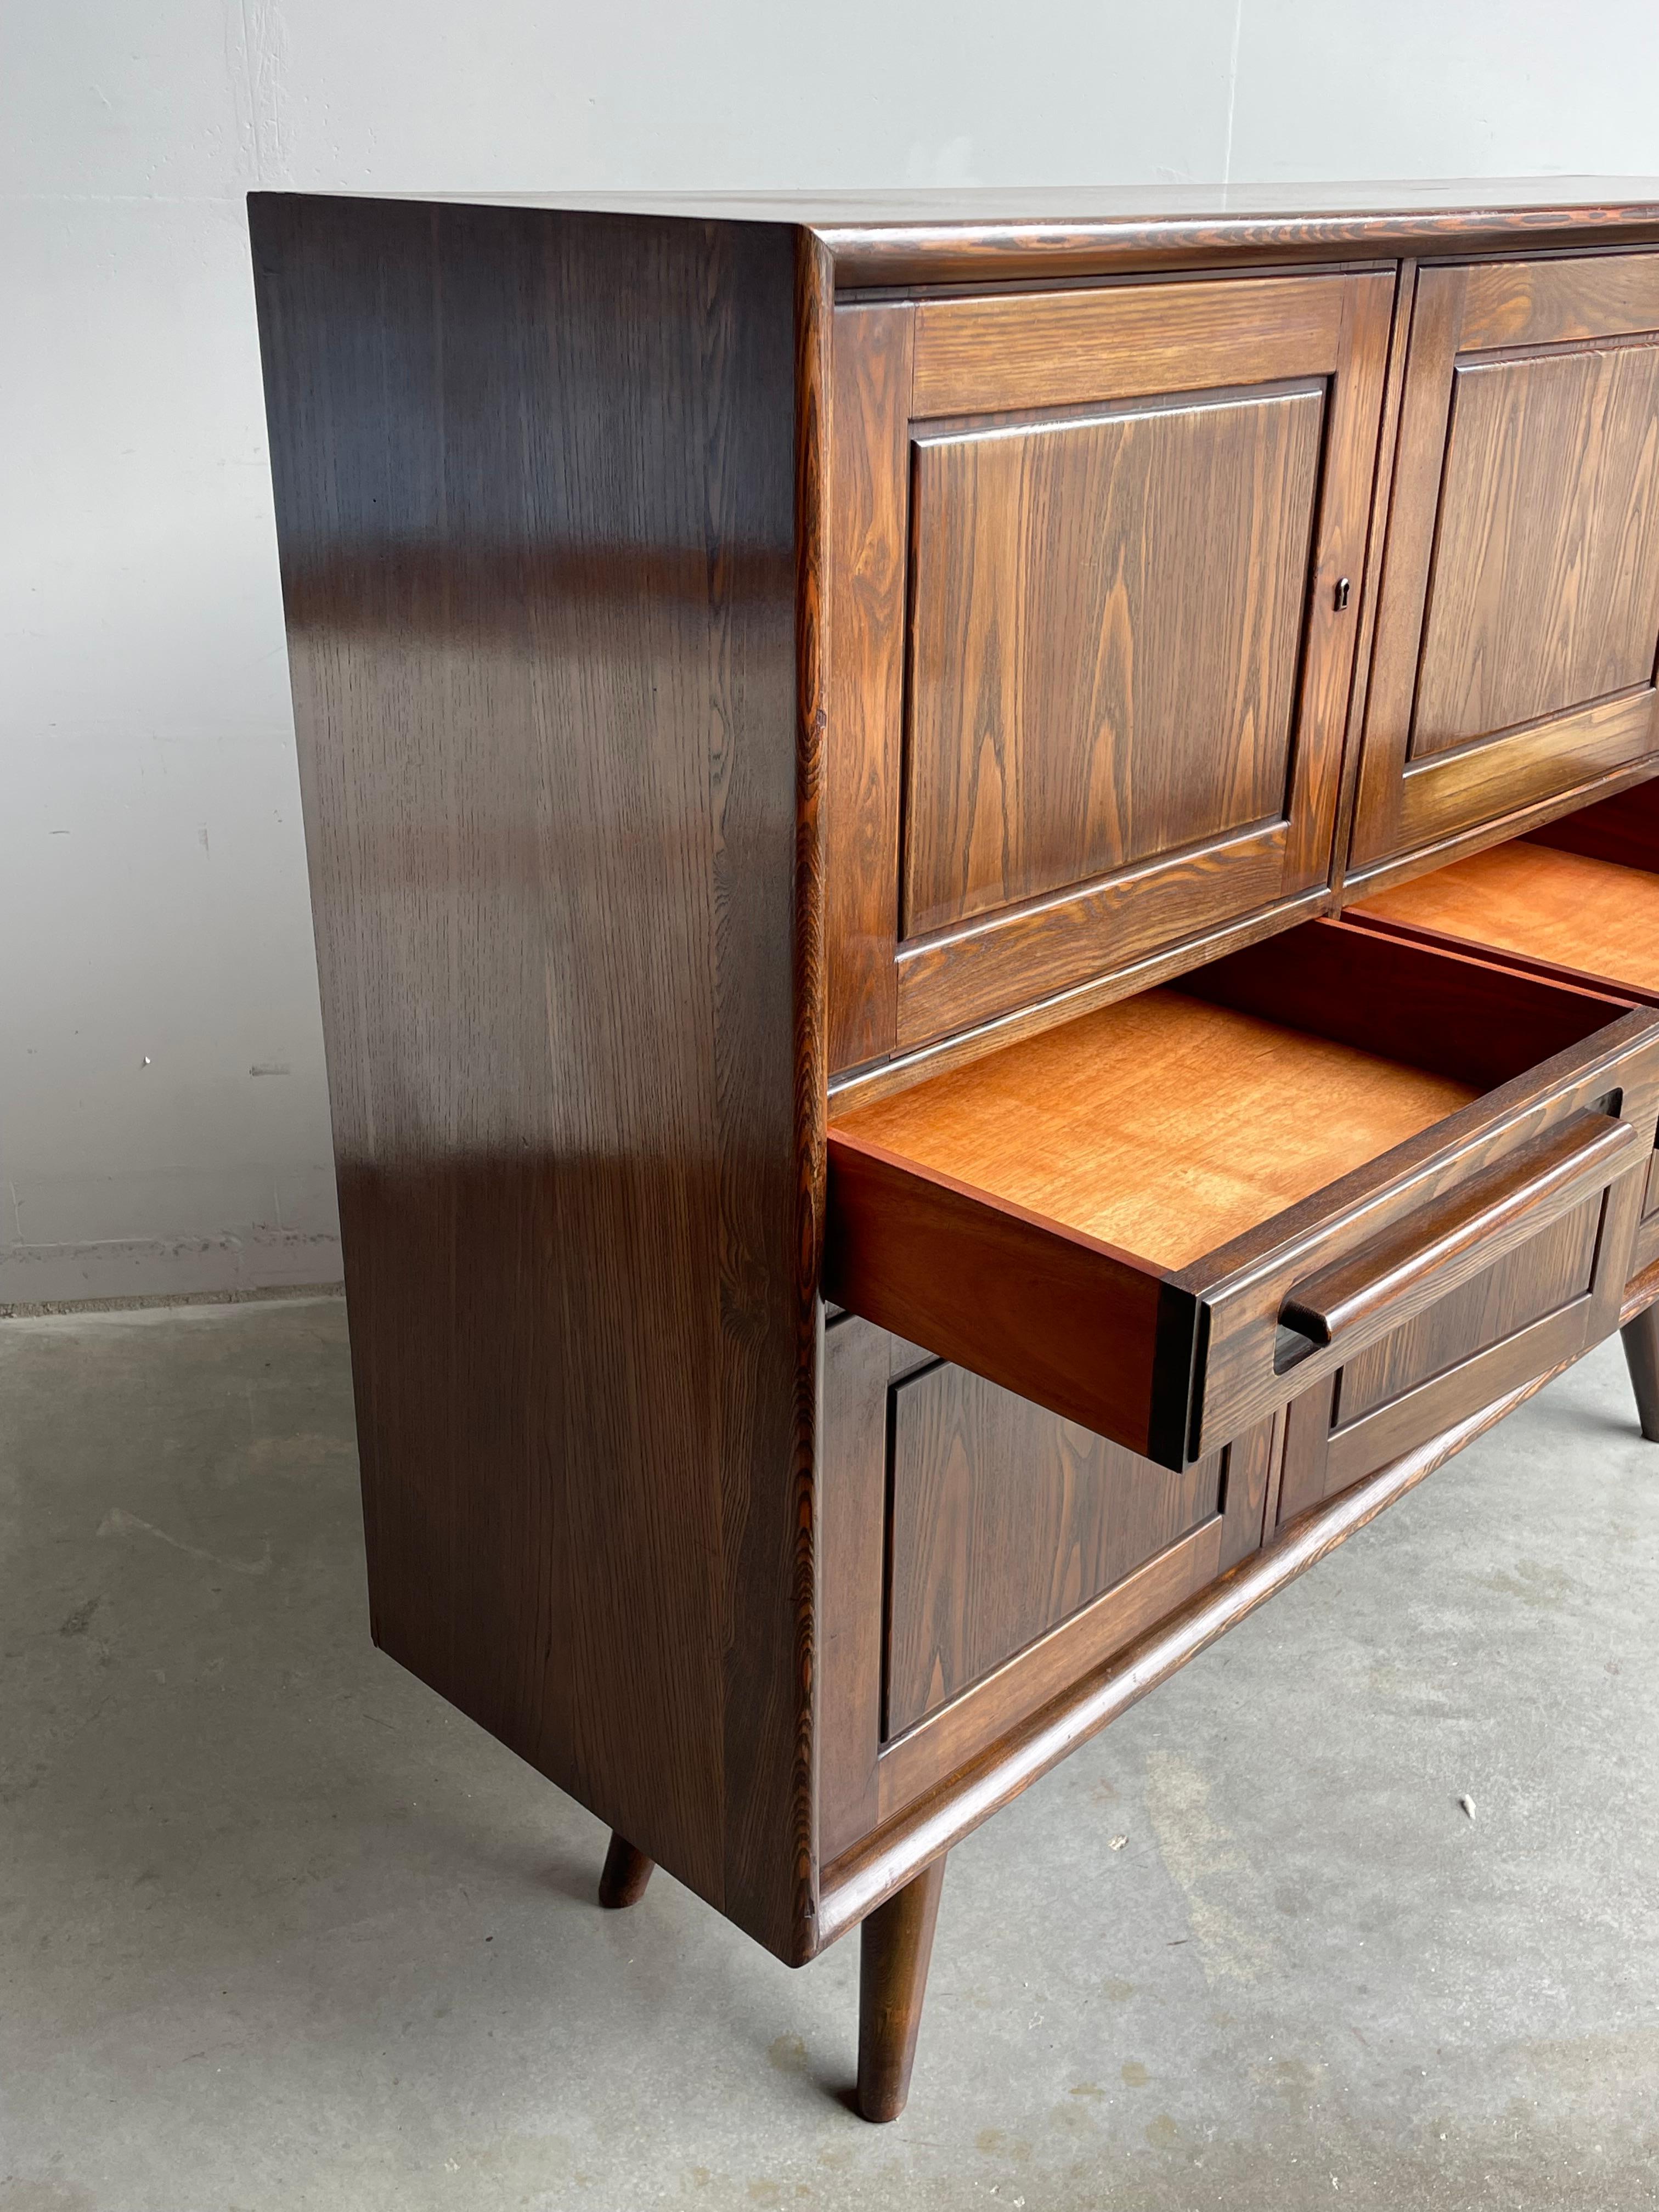 Very Rare Mid-Century Modern Sideboard / Credenza by 't Woonhuys of Amsterdam For Sale 5